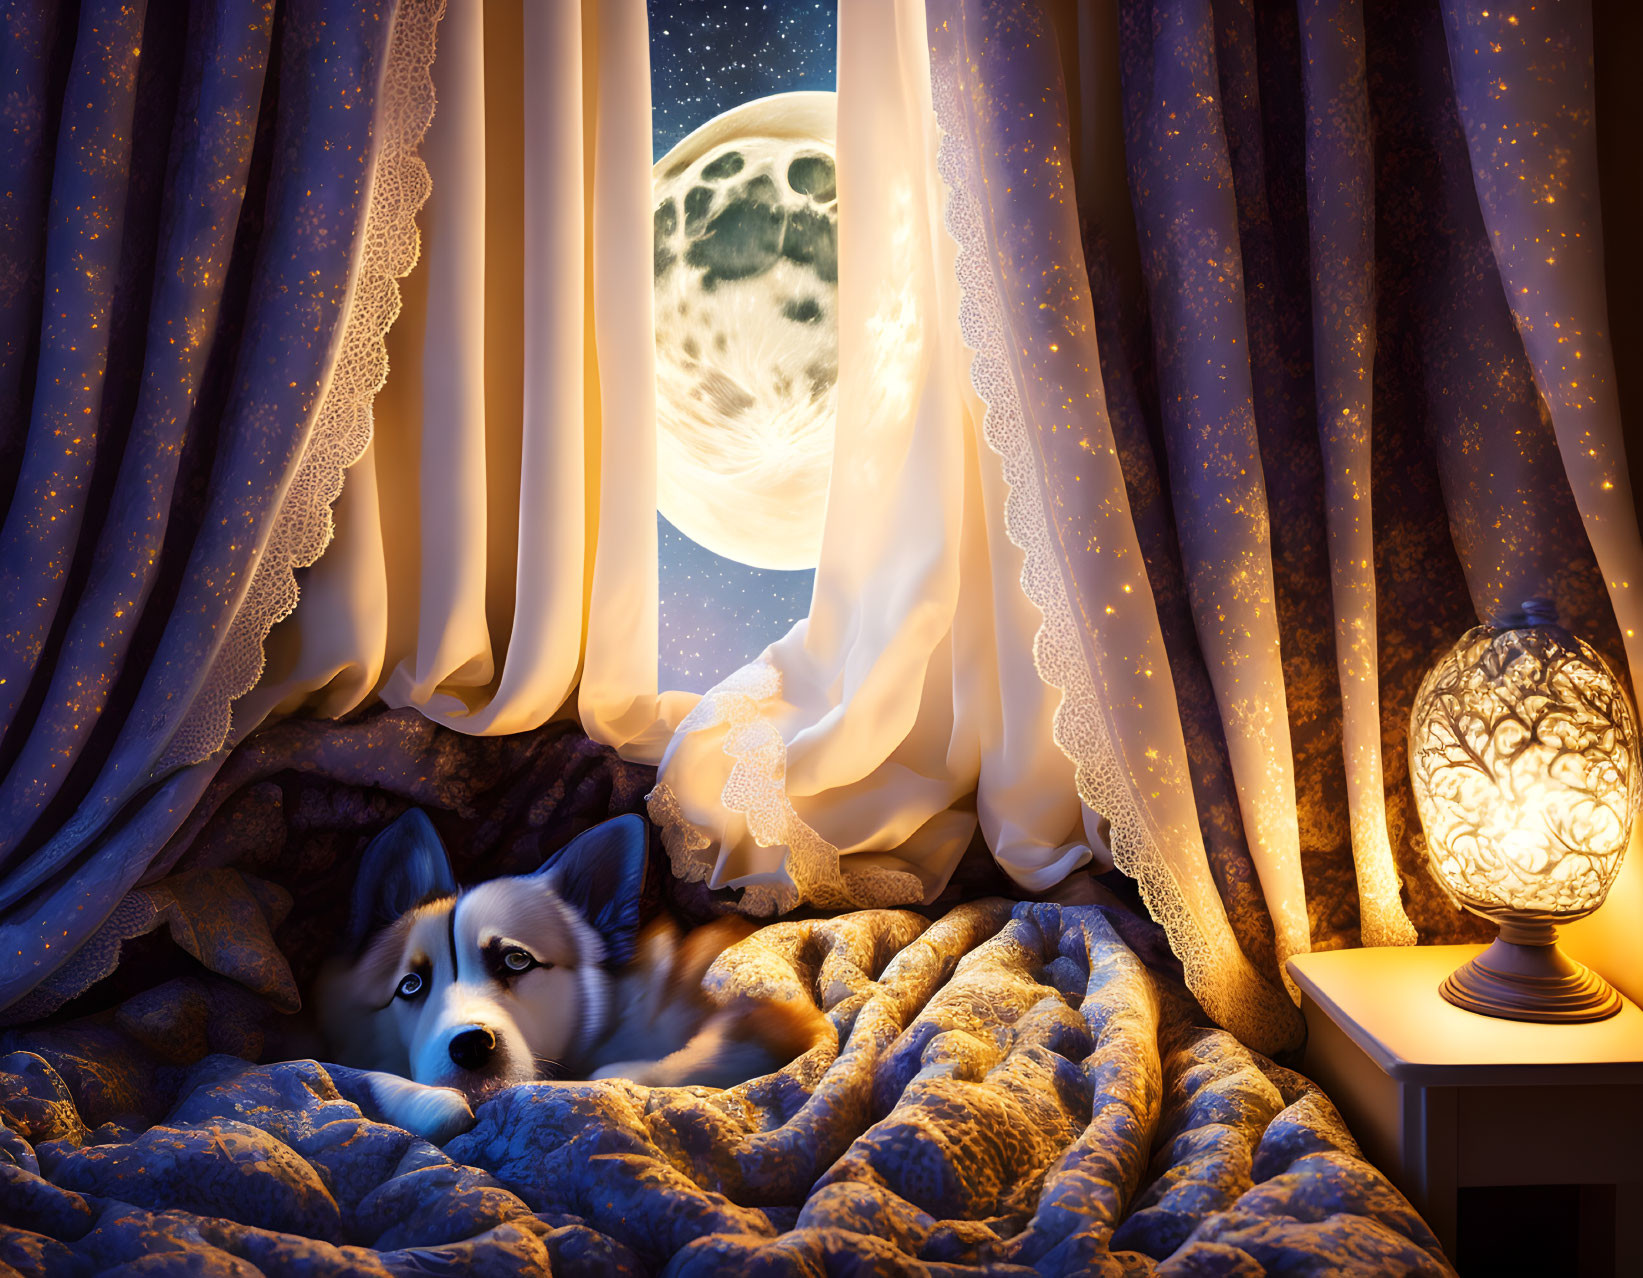 Husky dog on cozy bed by window with full moon view.